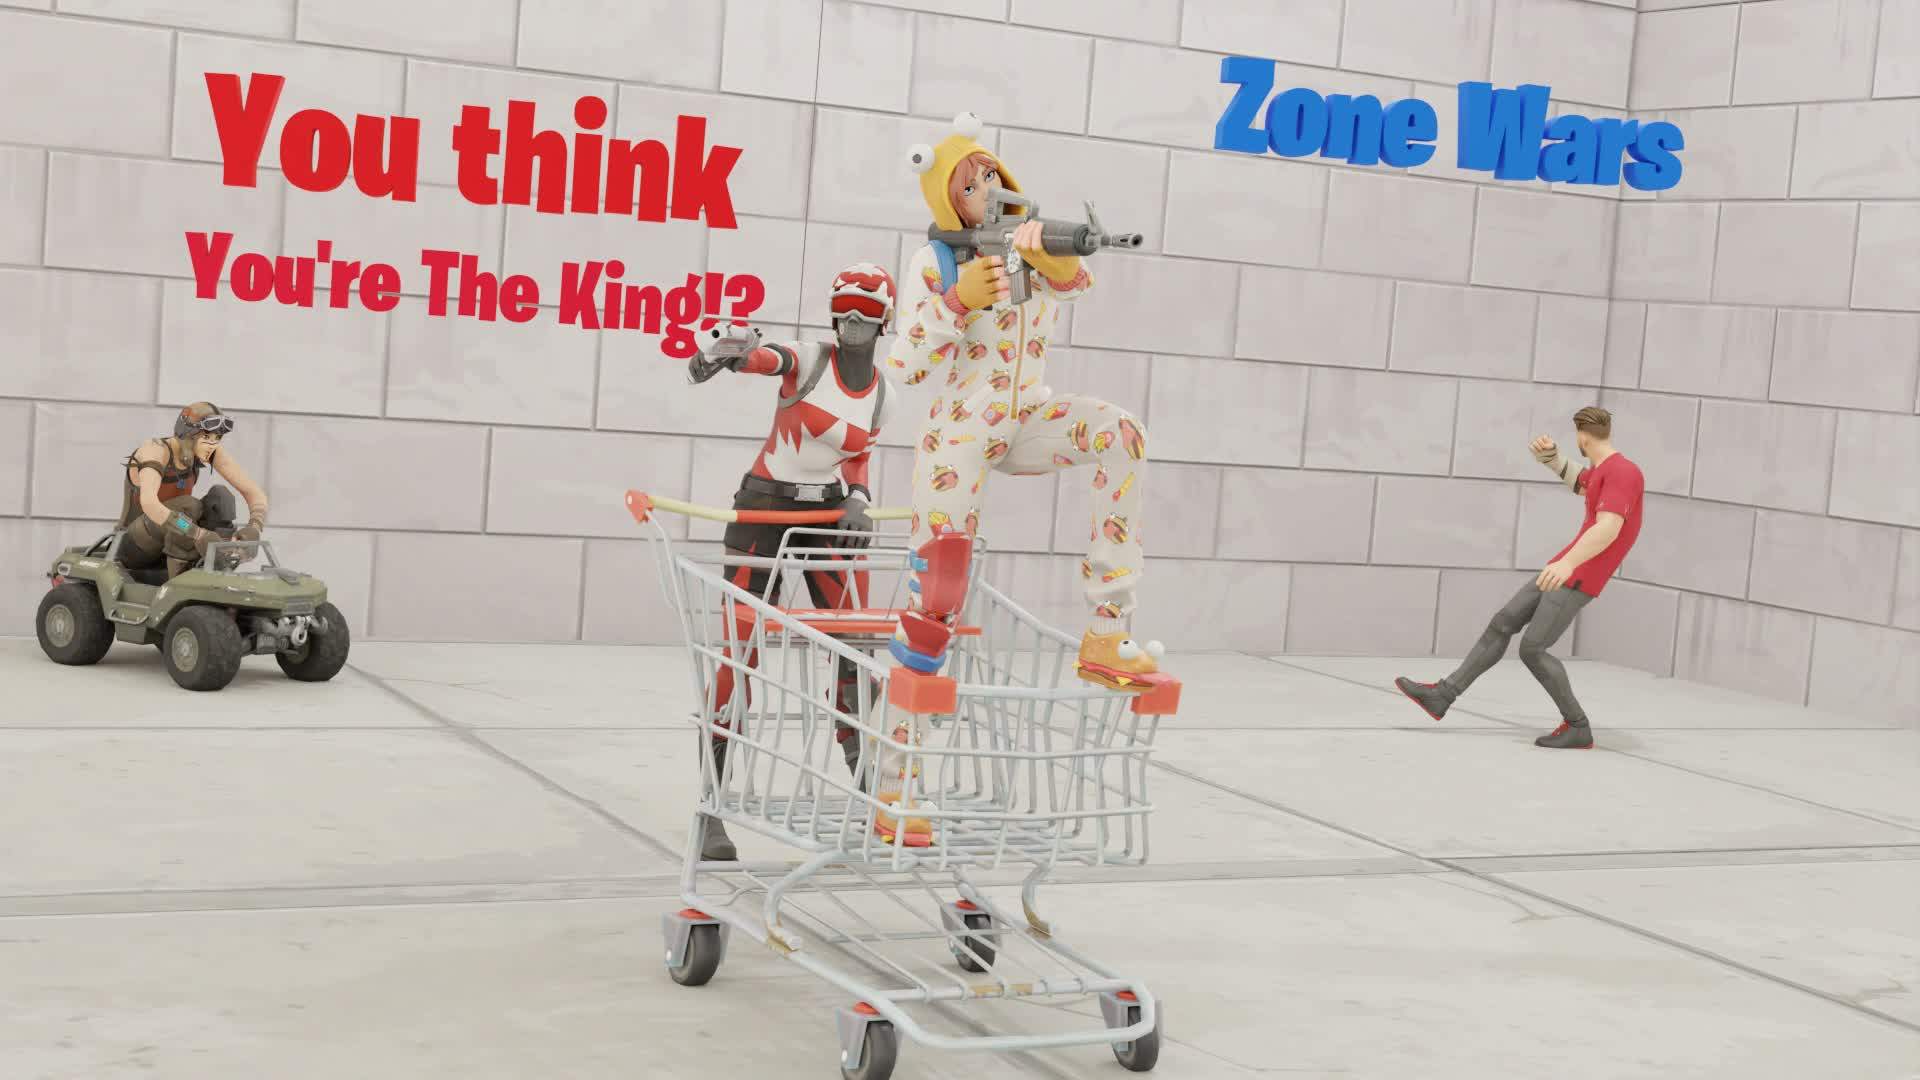 👑YOU THINK YOURE THE KING 🔫 ZONE WARS